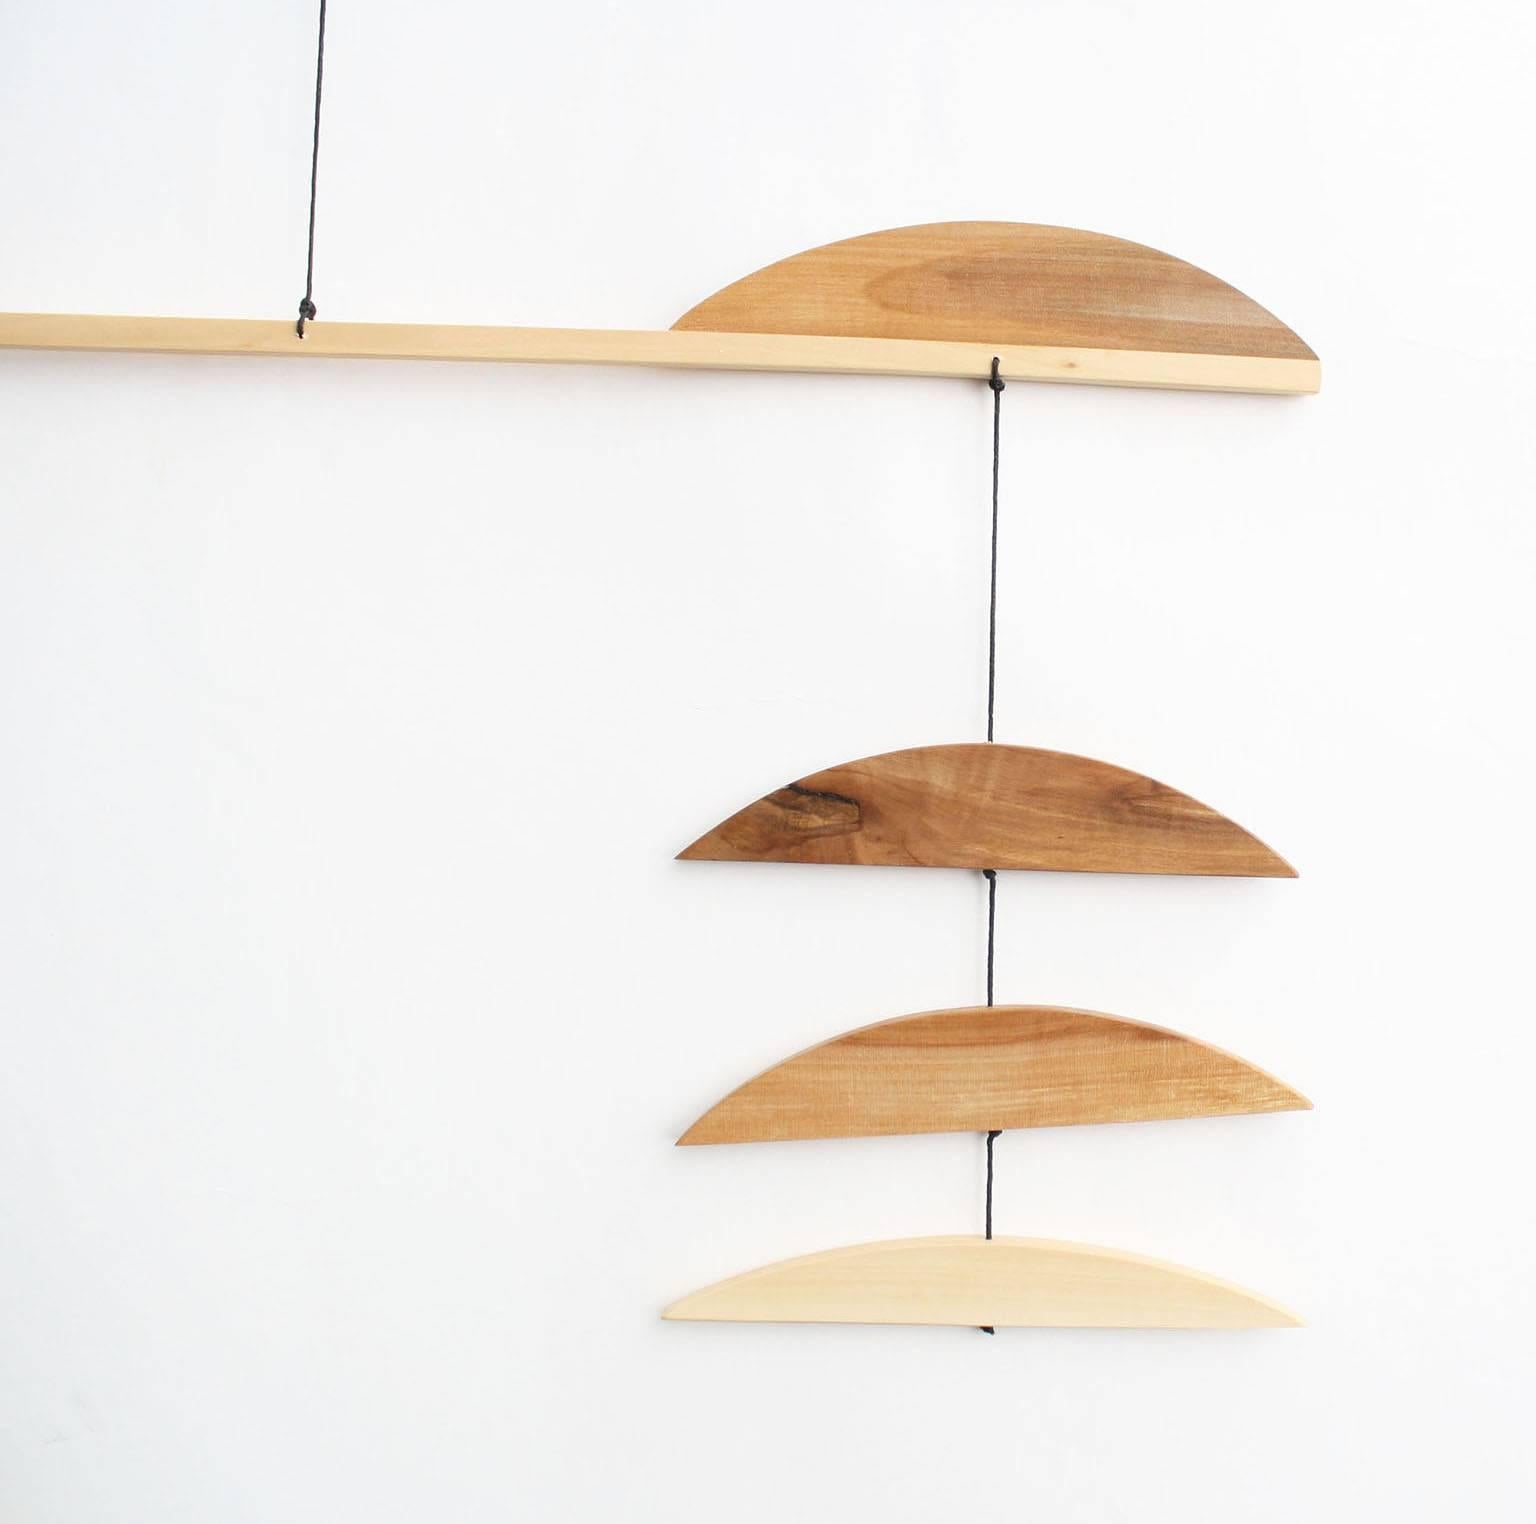 Fort Makers' Large Apple B Mobile is made in Brooklyn by Noah Spencer. His wooden kinetic sculptures explore organic and linear form and touch upon a human fascination with the universe.

Materials: apple wood, wax string with end loop for hanging